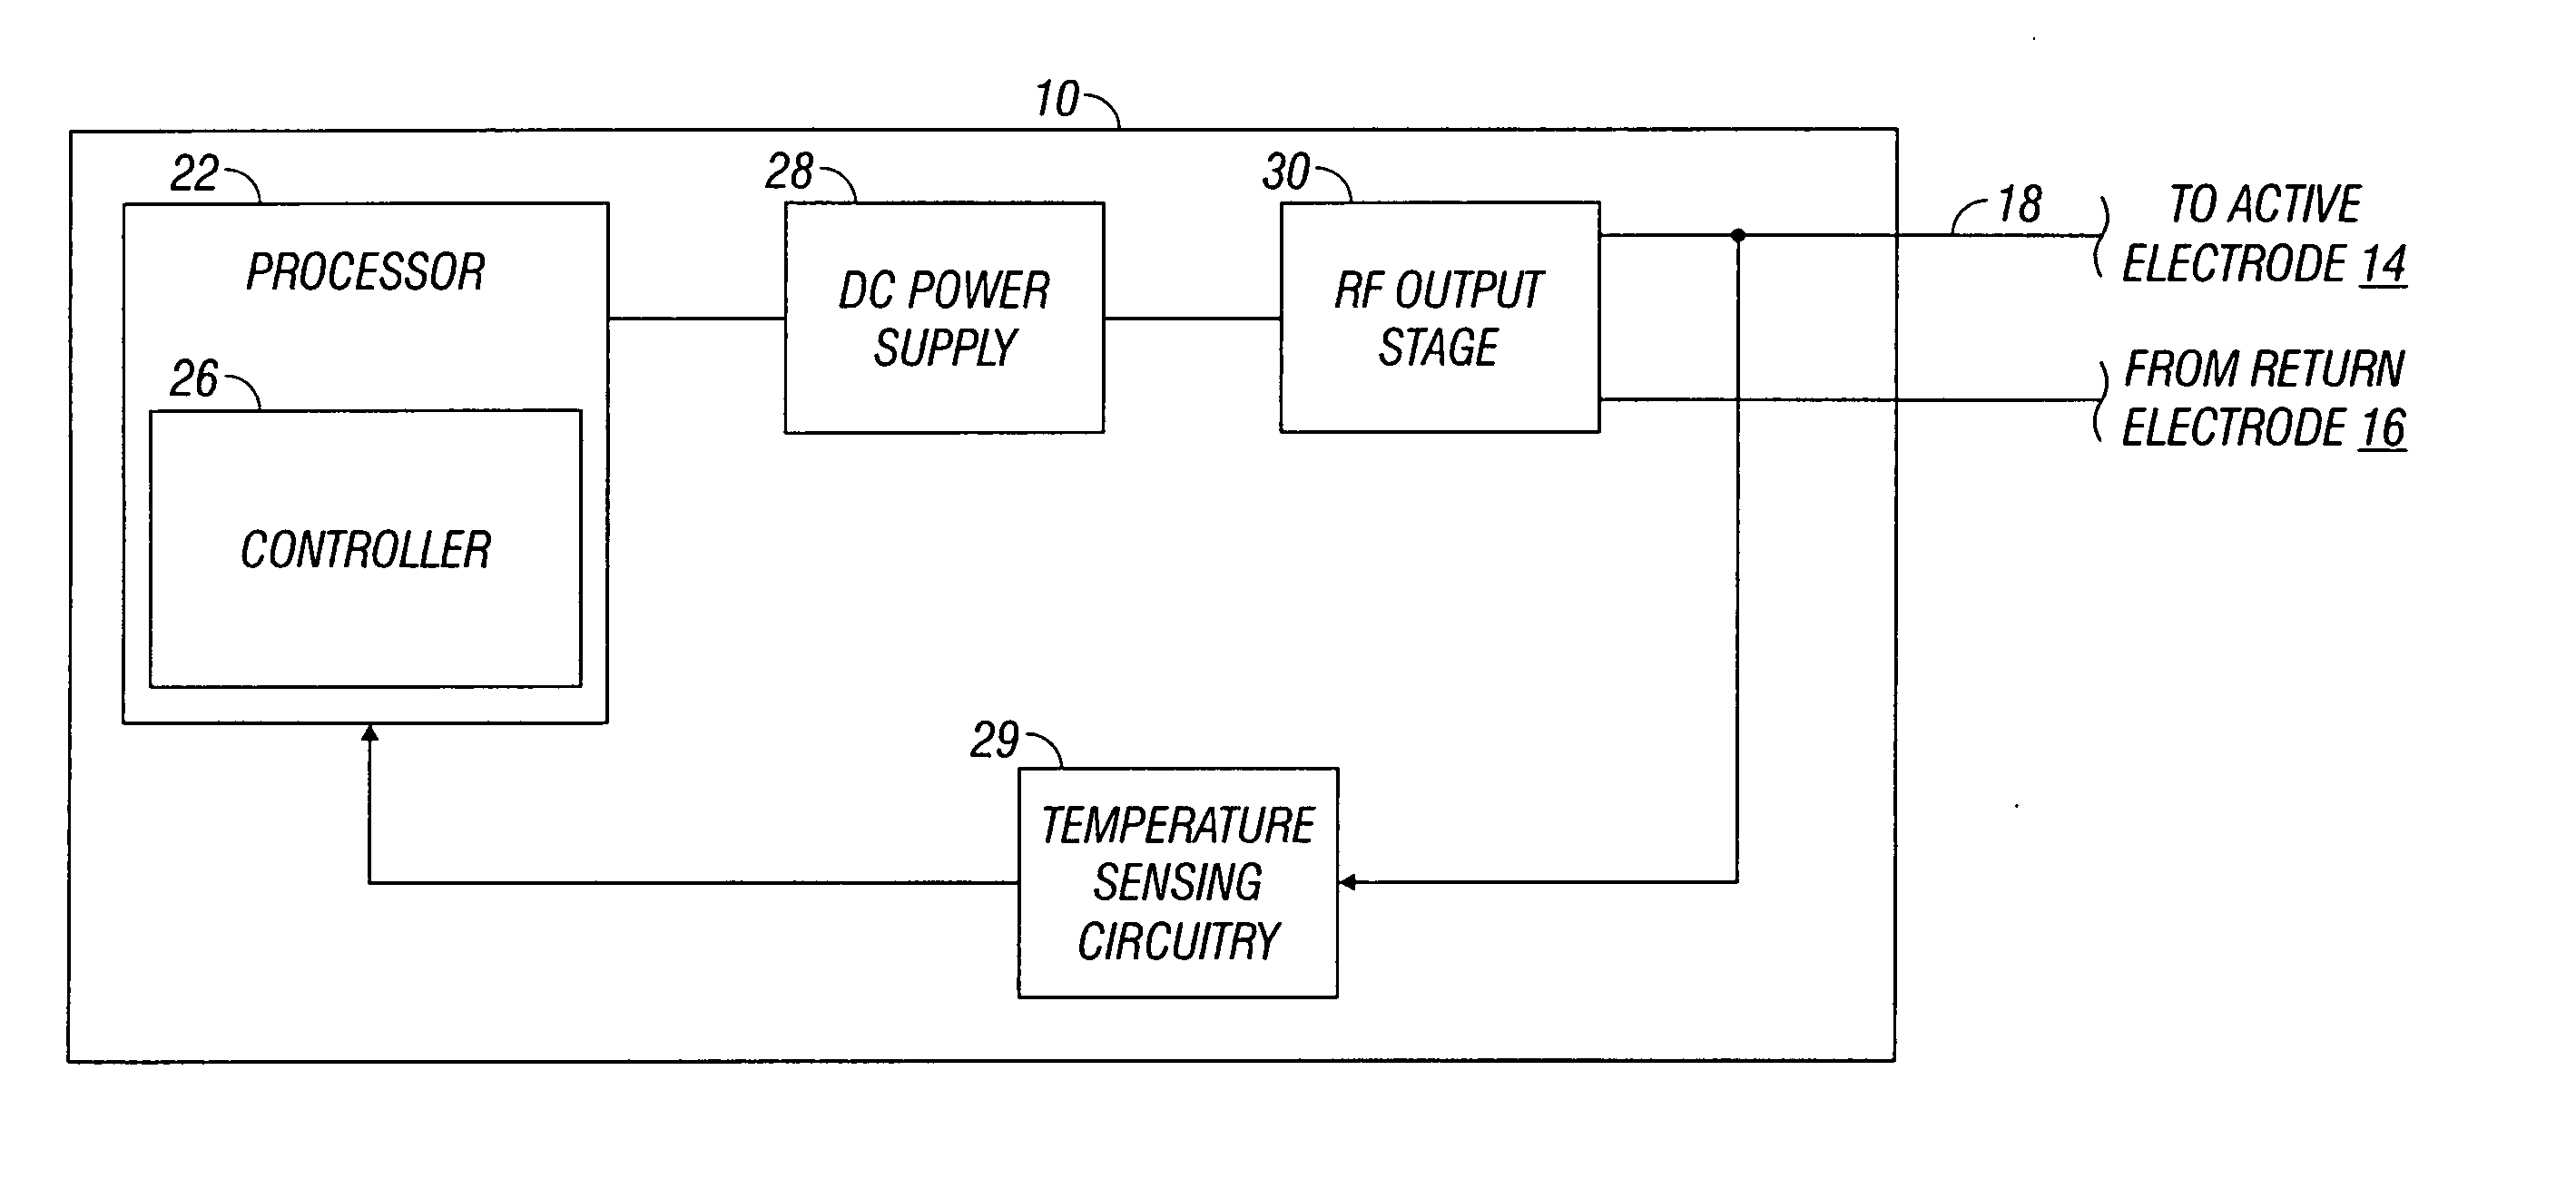 System and method for generating radio frequency energy